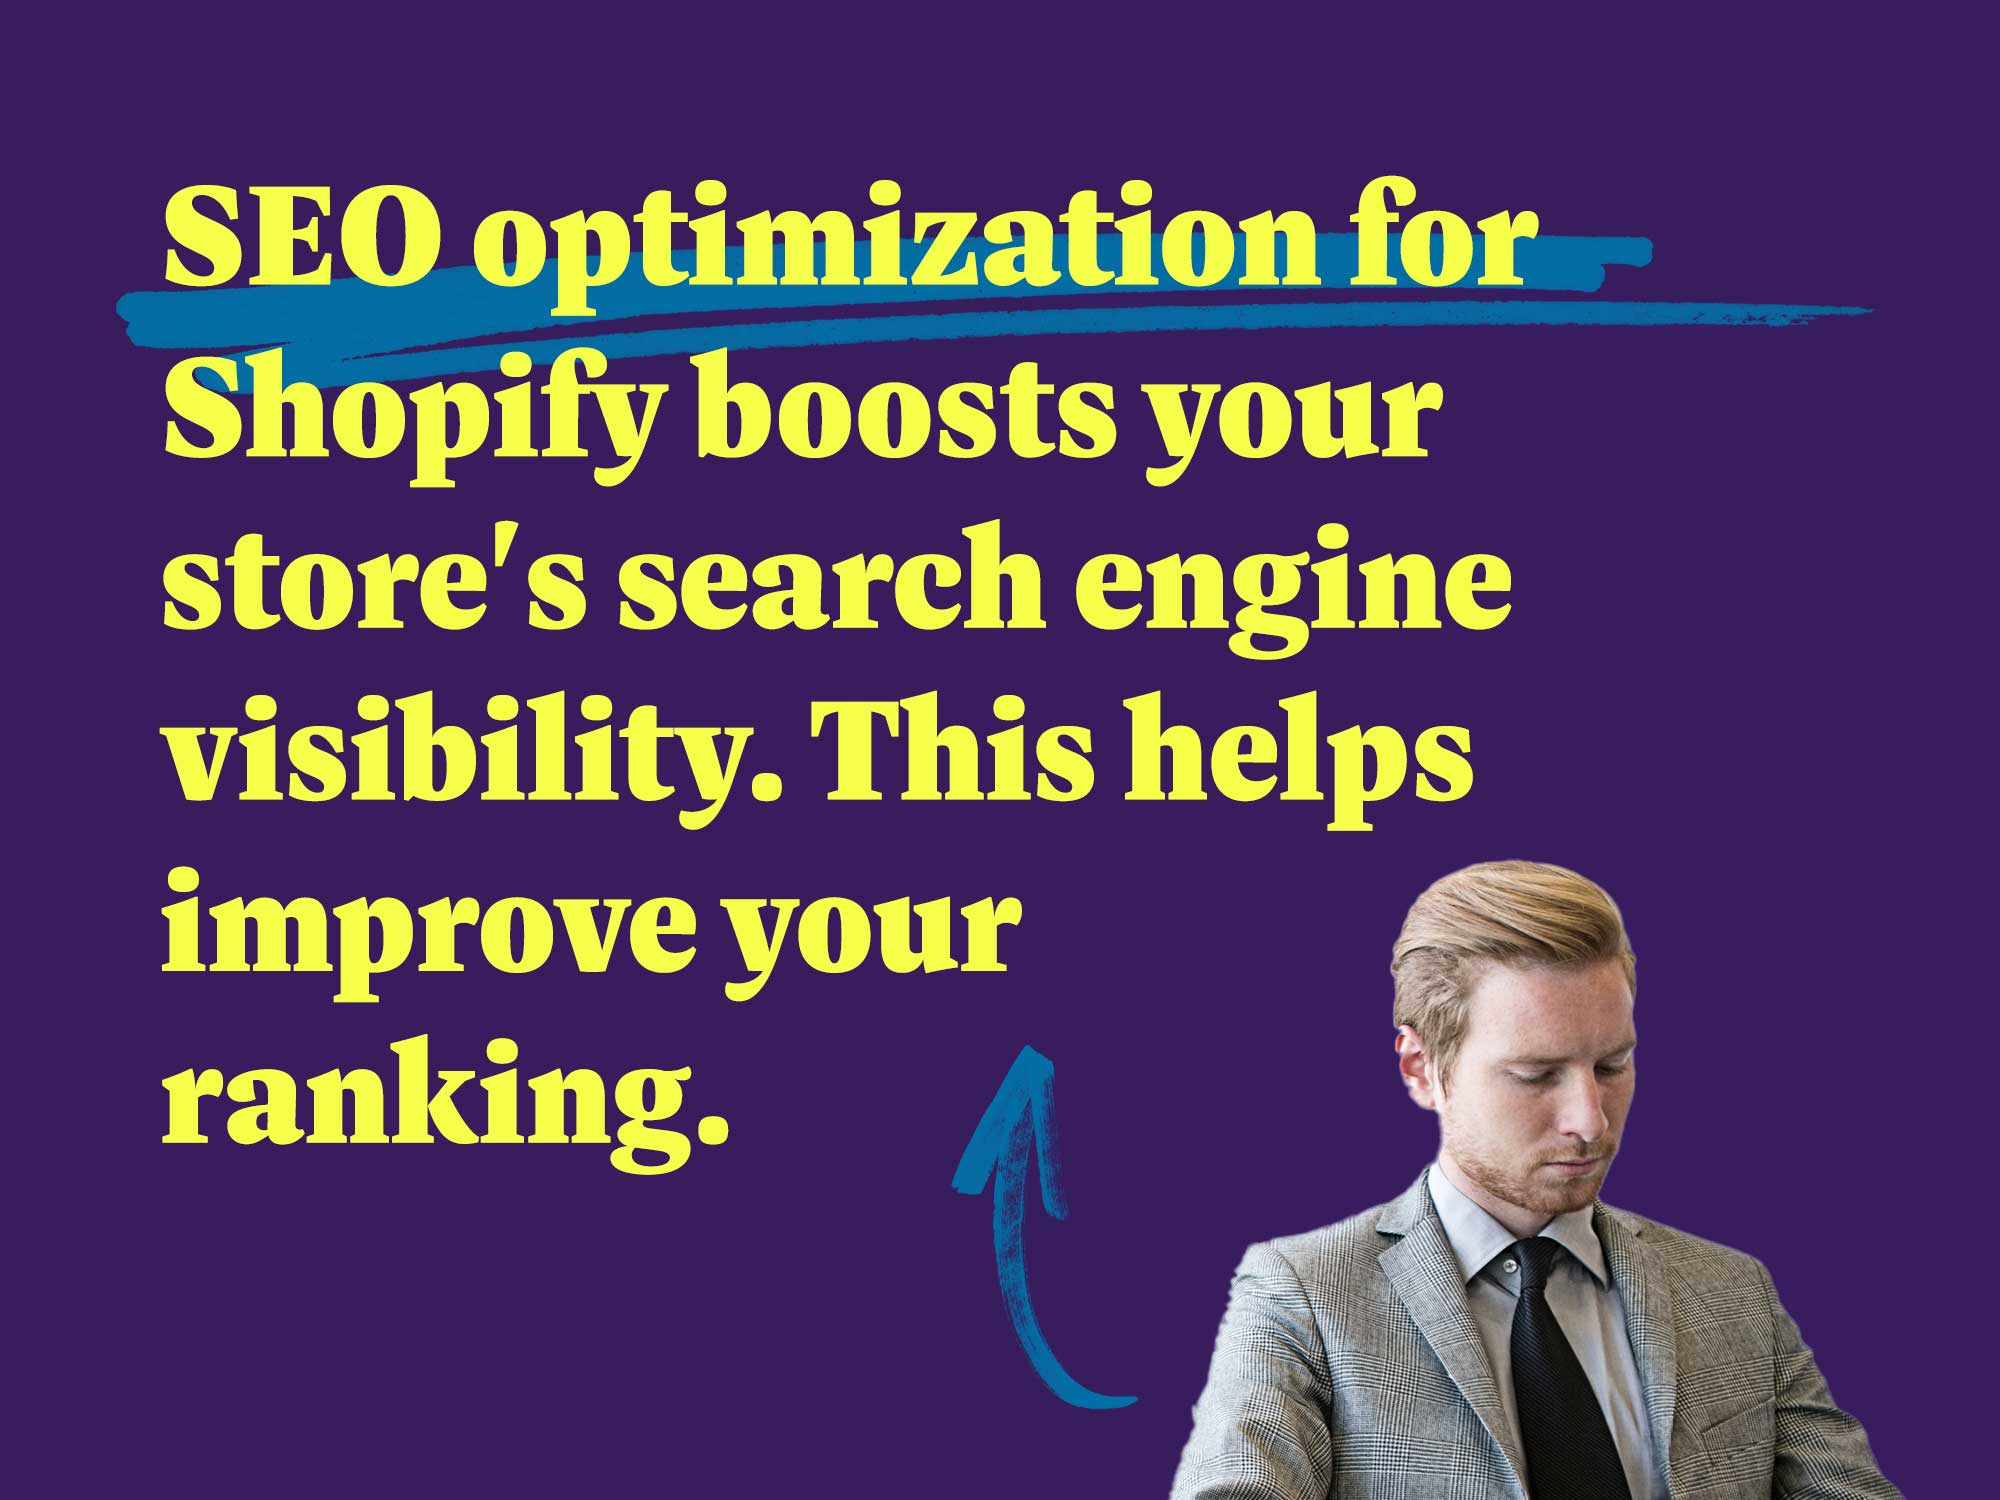 SEO optimization for Shopify boosts your store's search engine visibility. This helps improve your ranking.